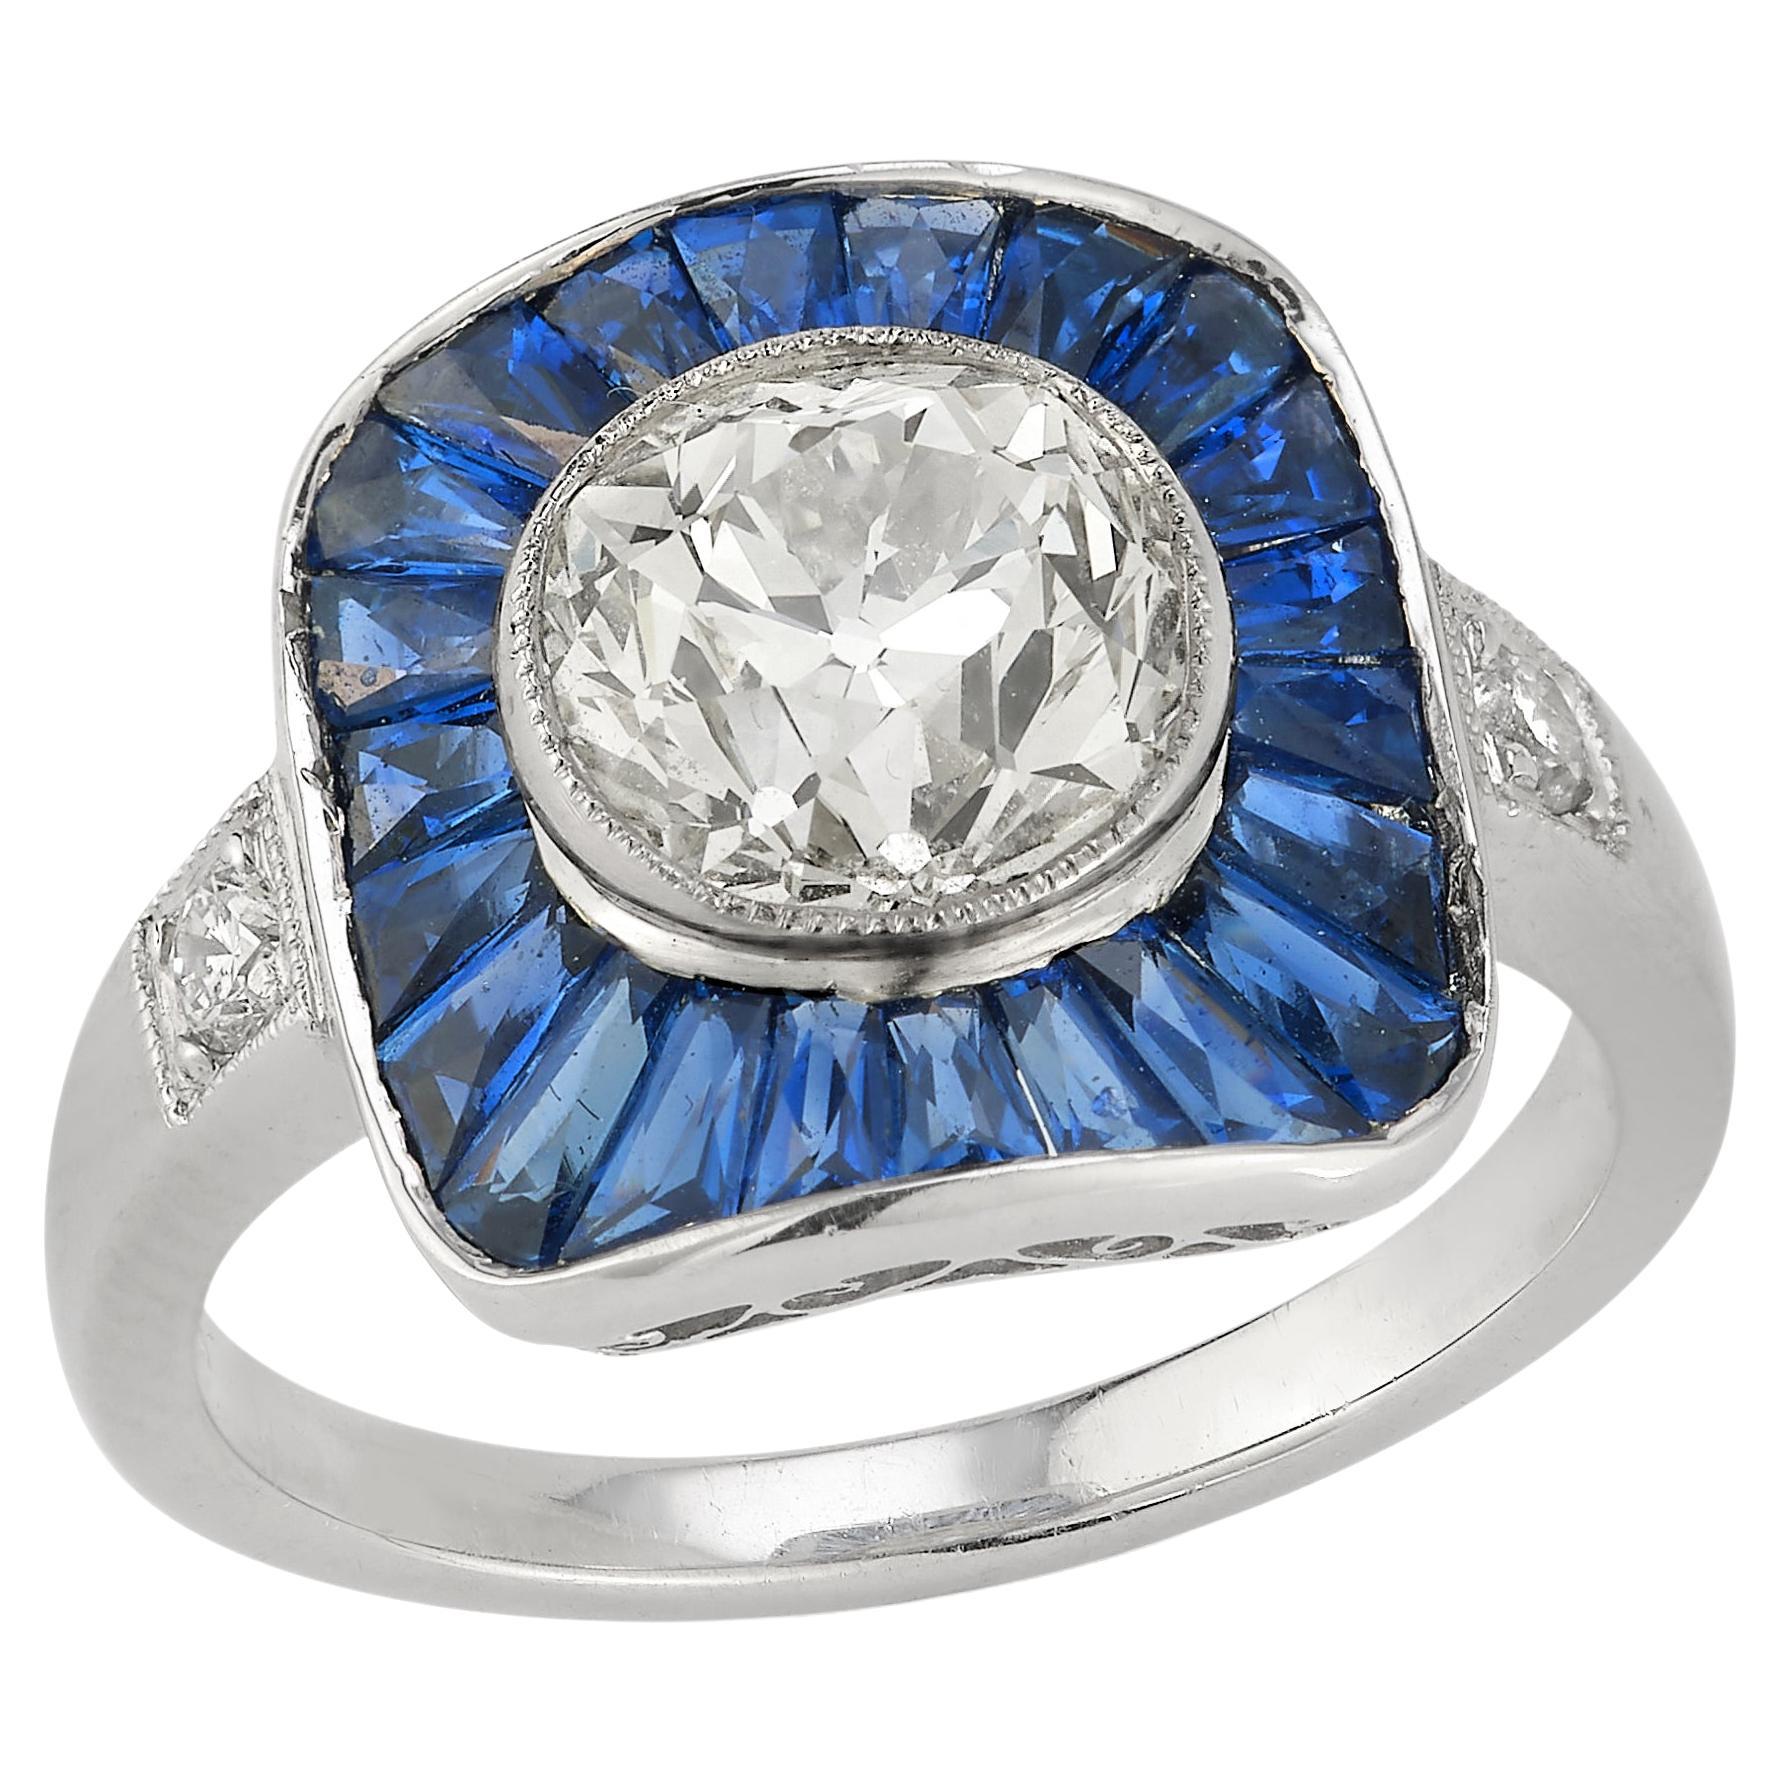 Old Mine Diamond & Sapphire Target Ring

1 central approximately 2.16 carats old mind diamond framed by 22 sapphires weighing approximately 1.61 carats, with 2 round diamonds weighing approximately .010 carats all set in a platinum ring

Ring Size: